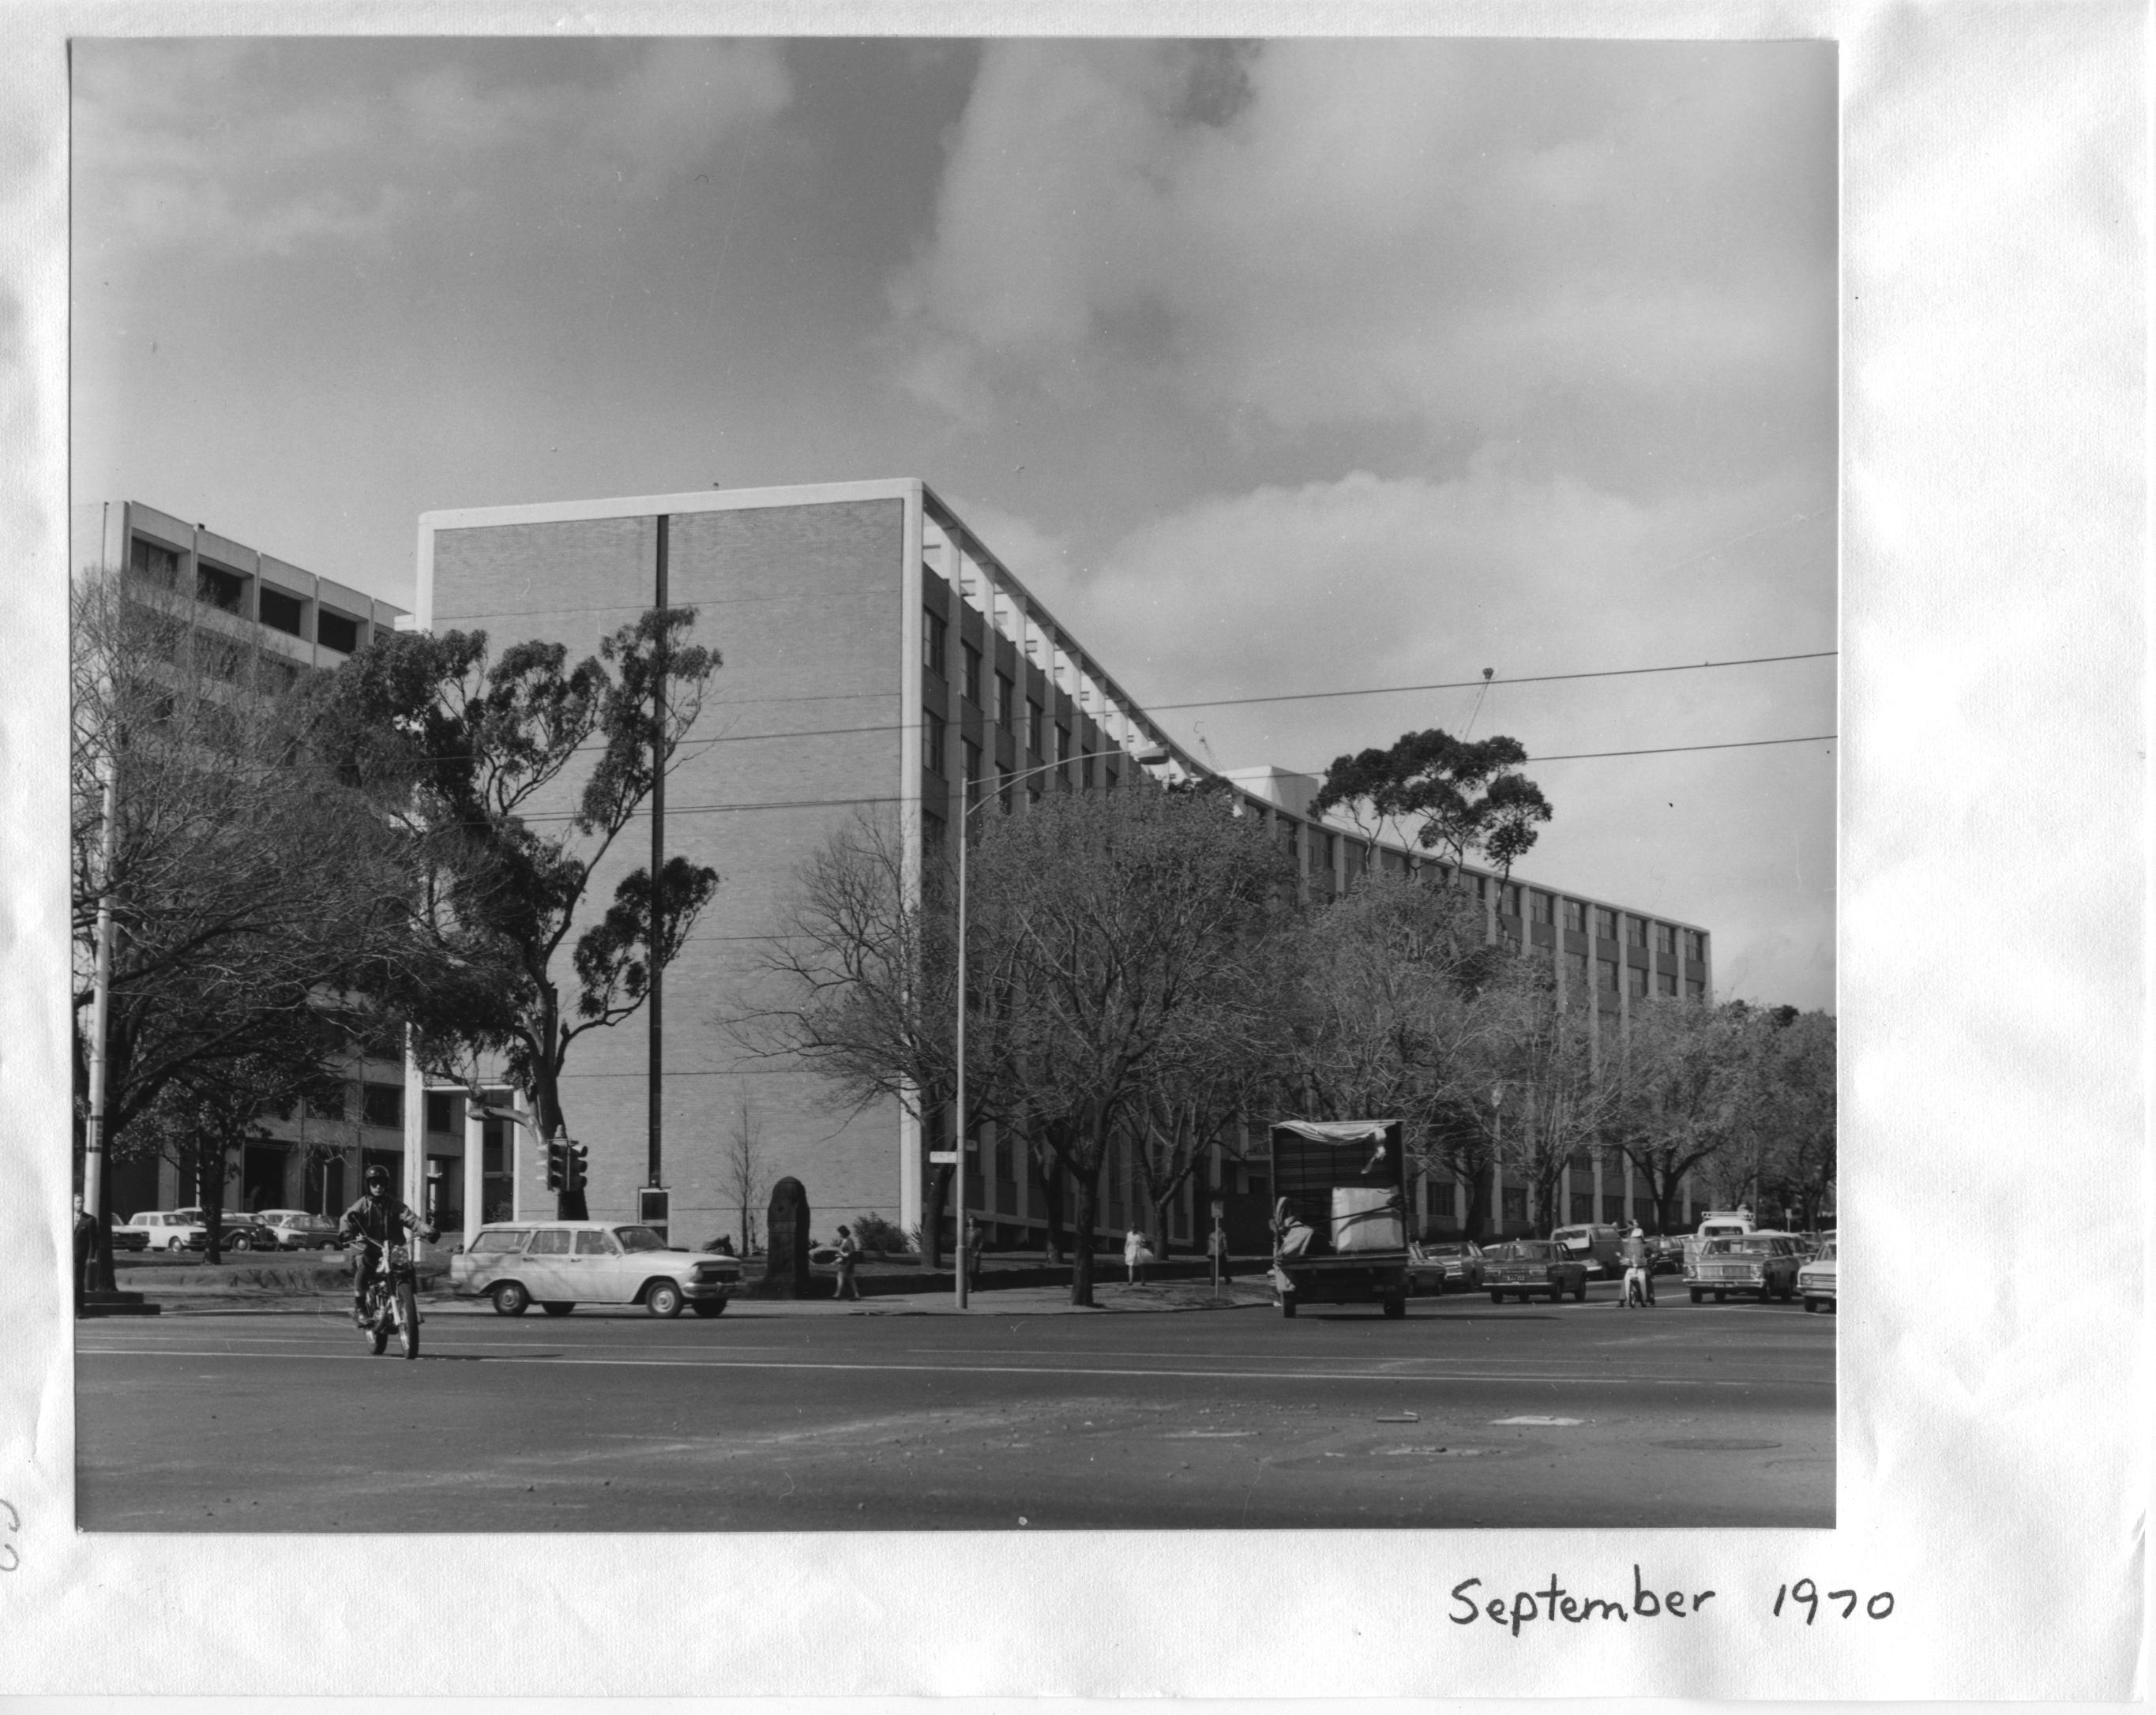 The main Medical building from the Royal Parade and Grattan Street intersection, 1970